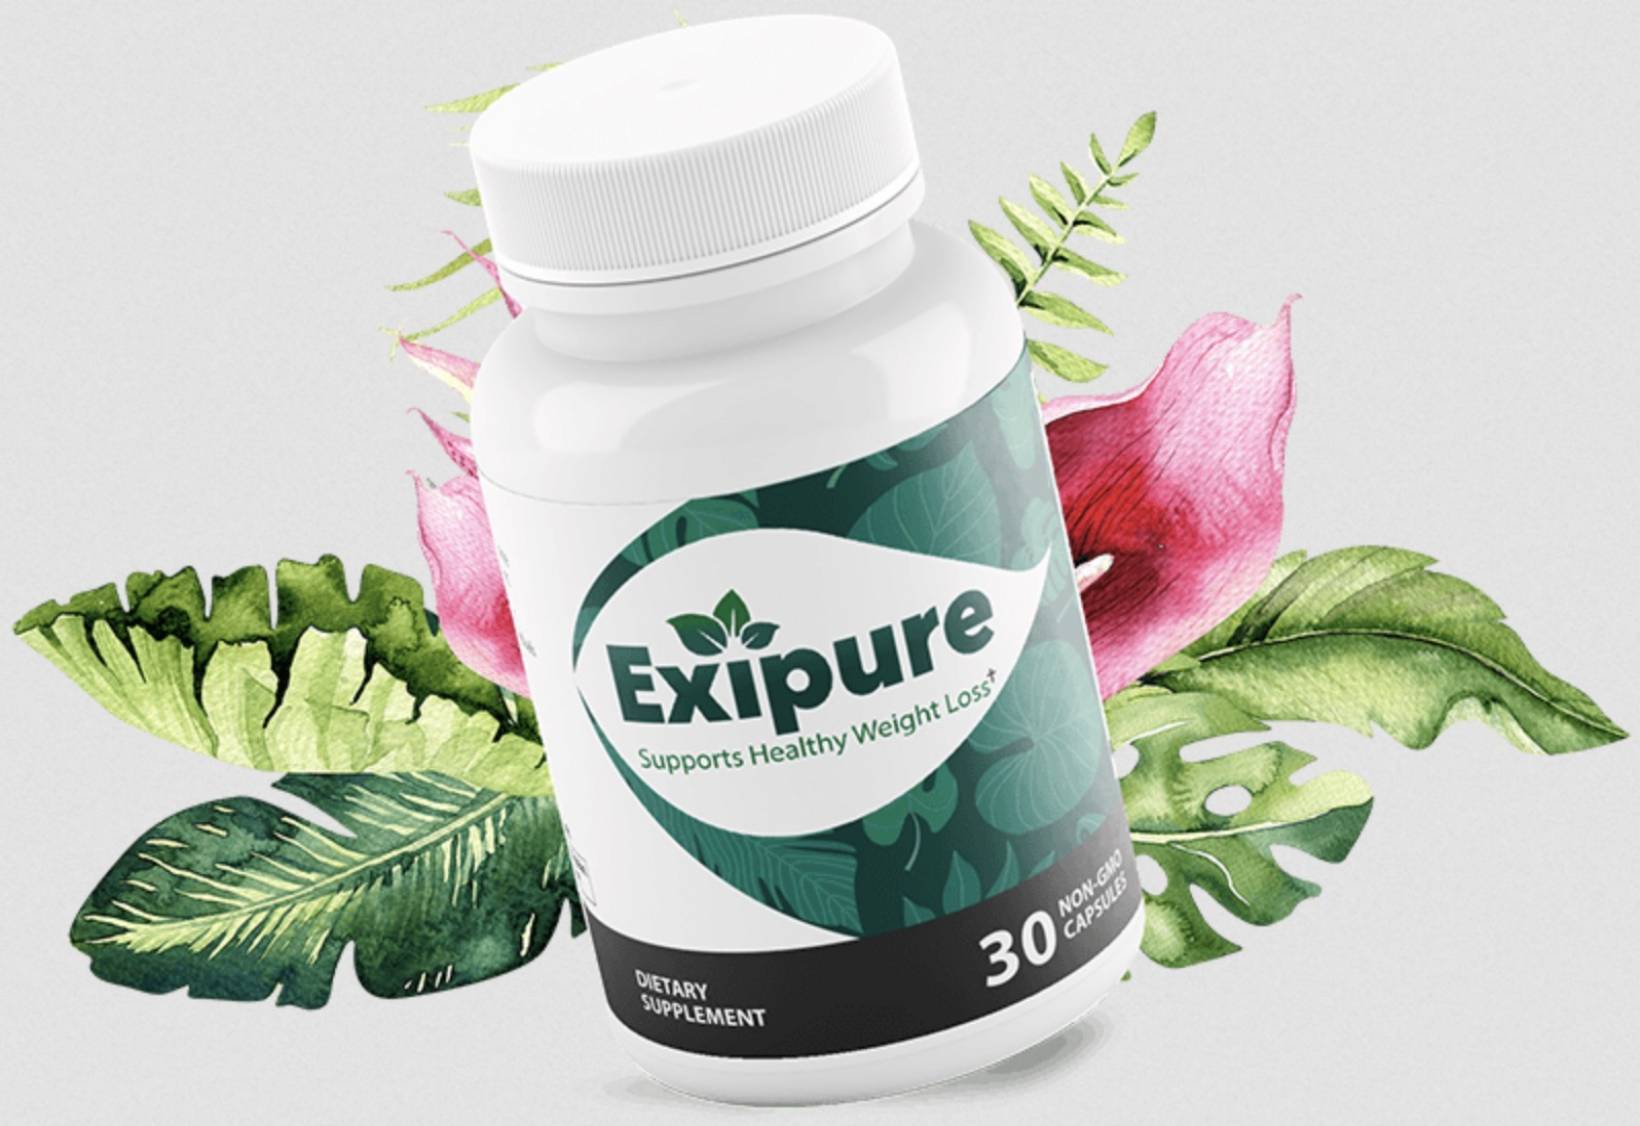 Exipure Reviews From Users